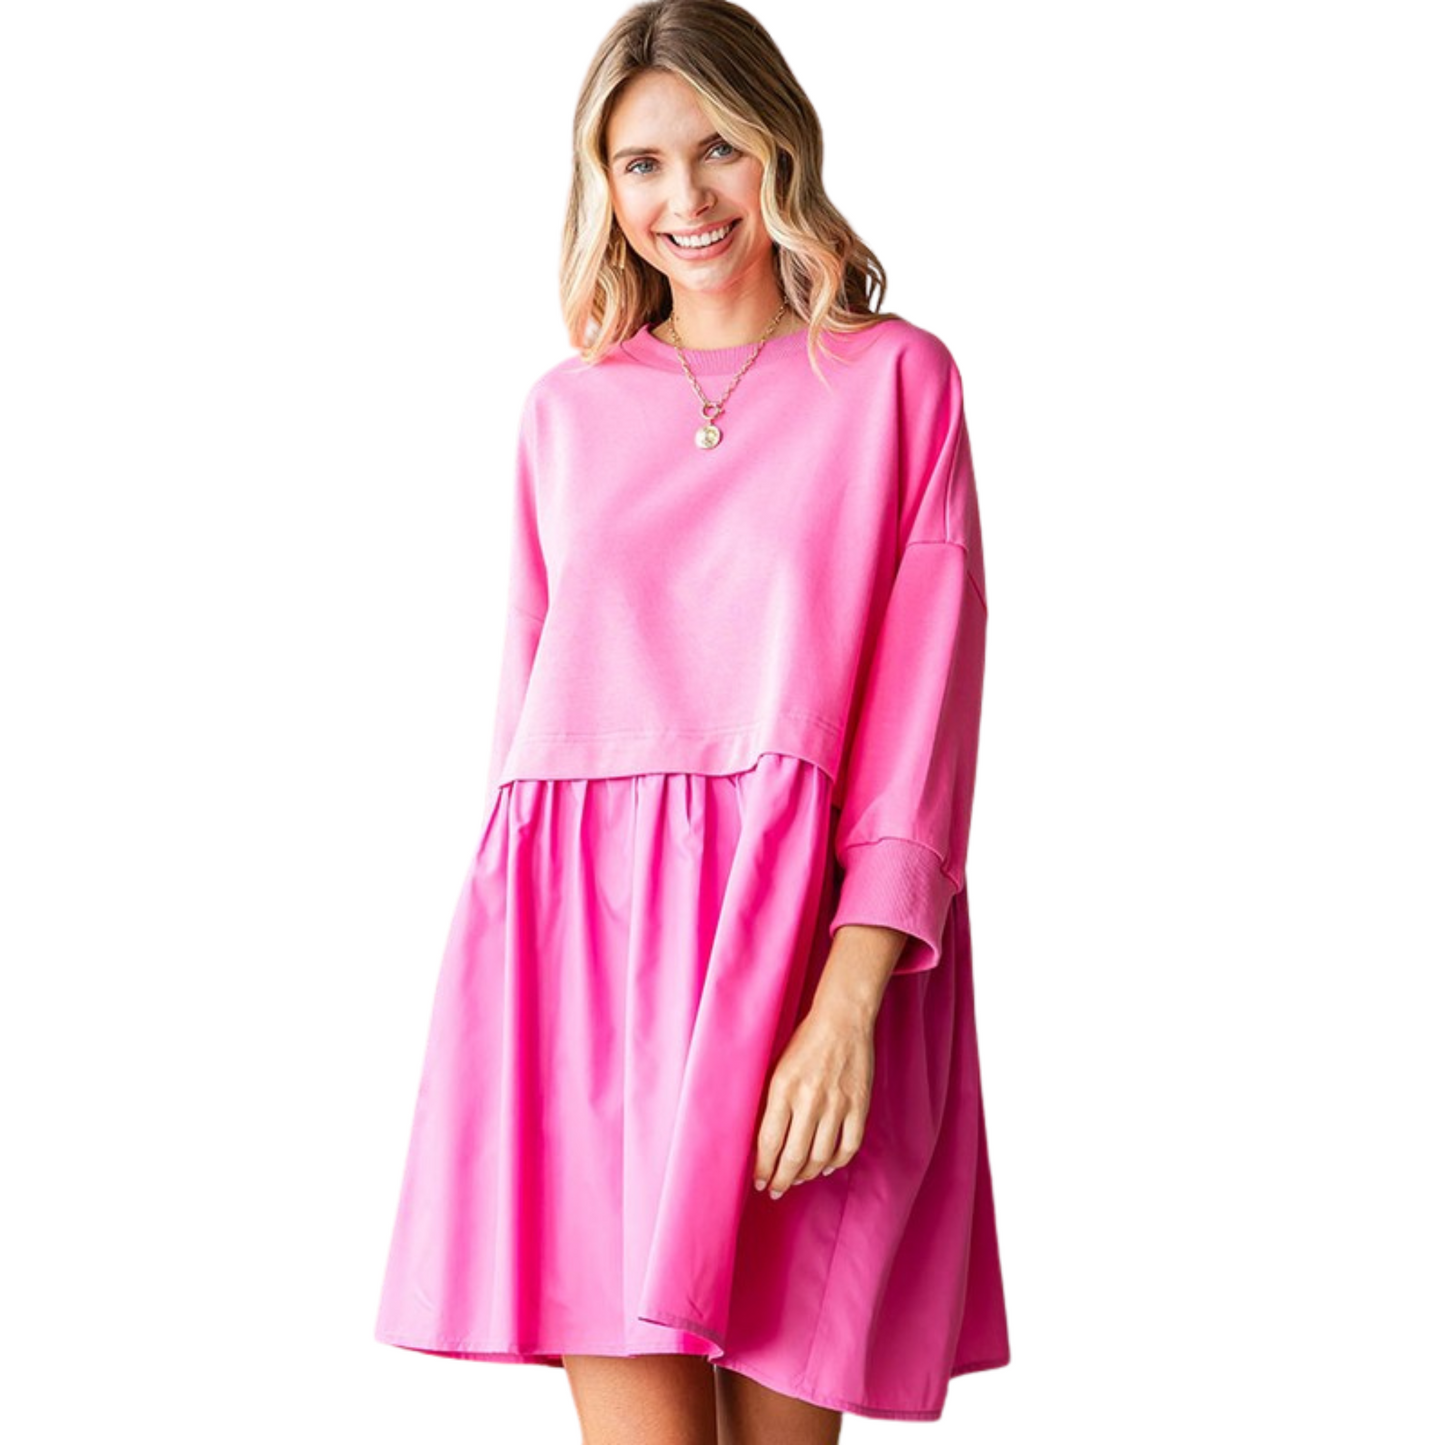 This 3/4 Sleeve Contrast Sweatshirt Dress is the perfect addition to your wardrobe. Made with a solid colored fabric, it features a crew neckline and dropped shoulder banded cuffs, providing maximum comfort and style. The contrasting shirred bottom layer adds a unique touch to this dress. Perfect for any occasion.